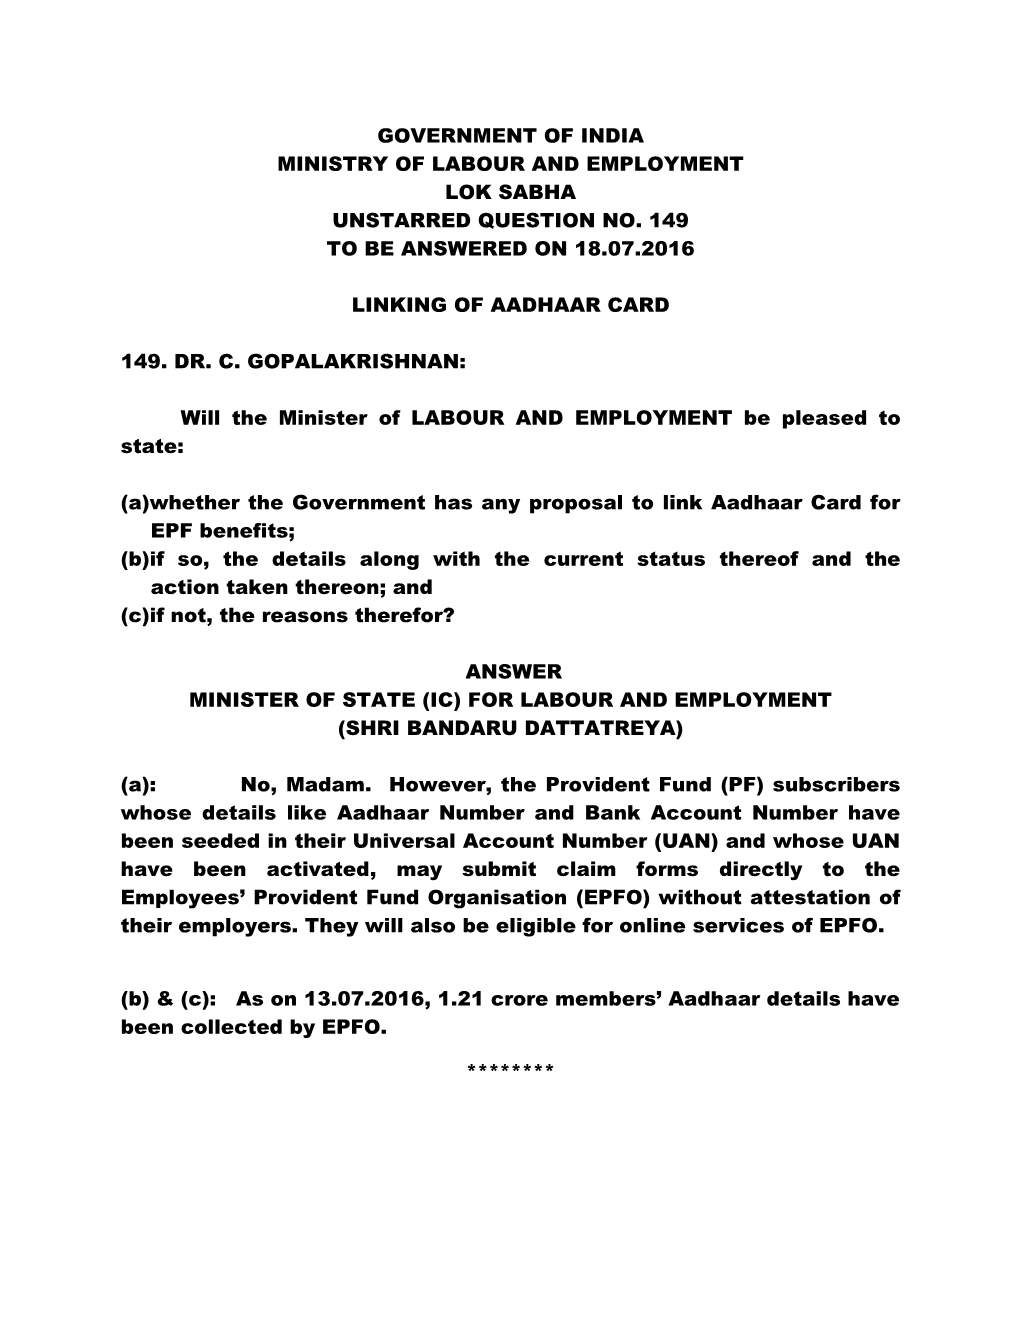 Government of India Ministry of Labour and Employment Lok Sabha Unstarred Question No